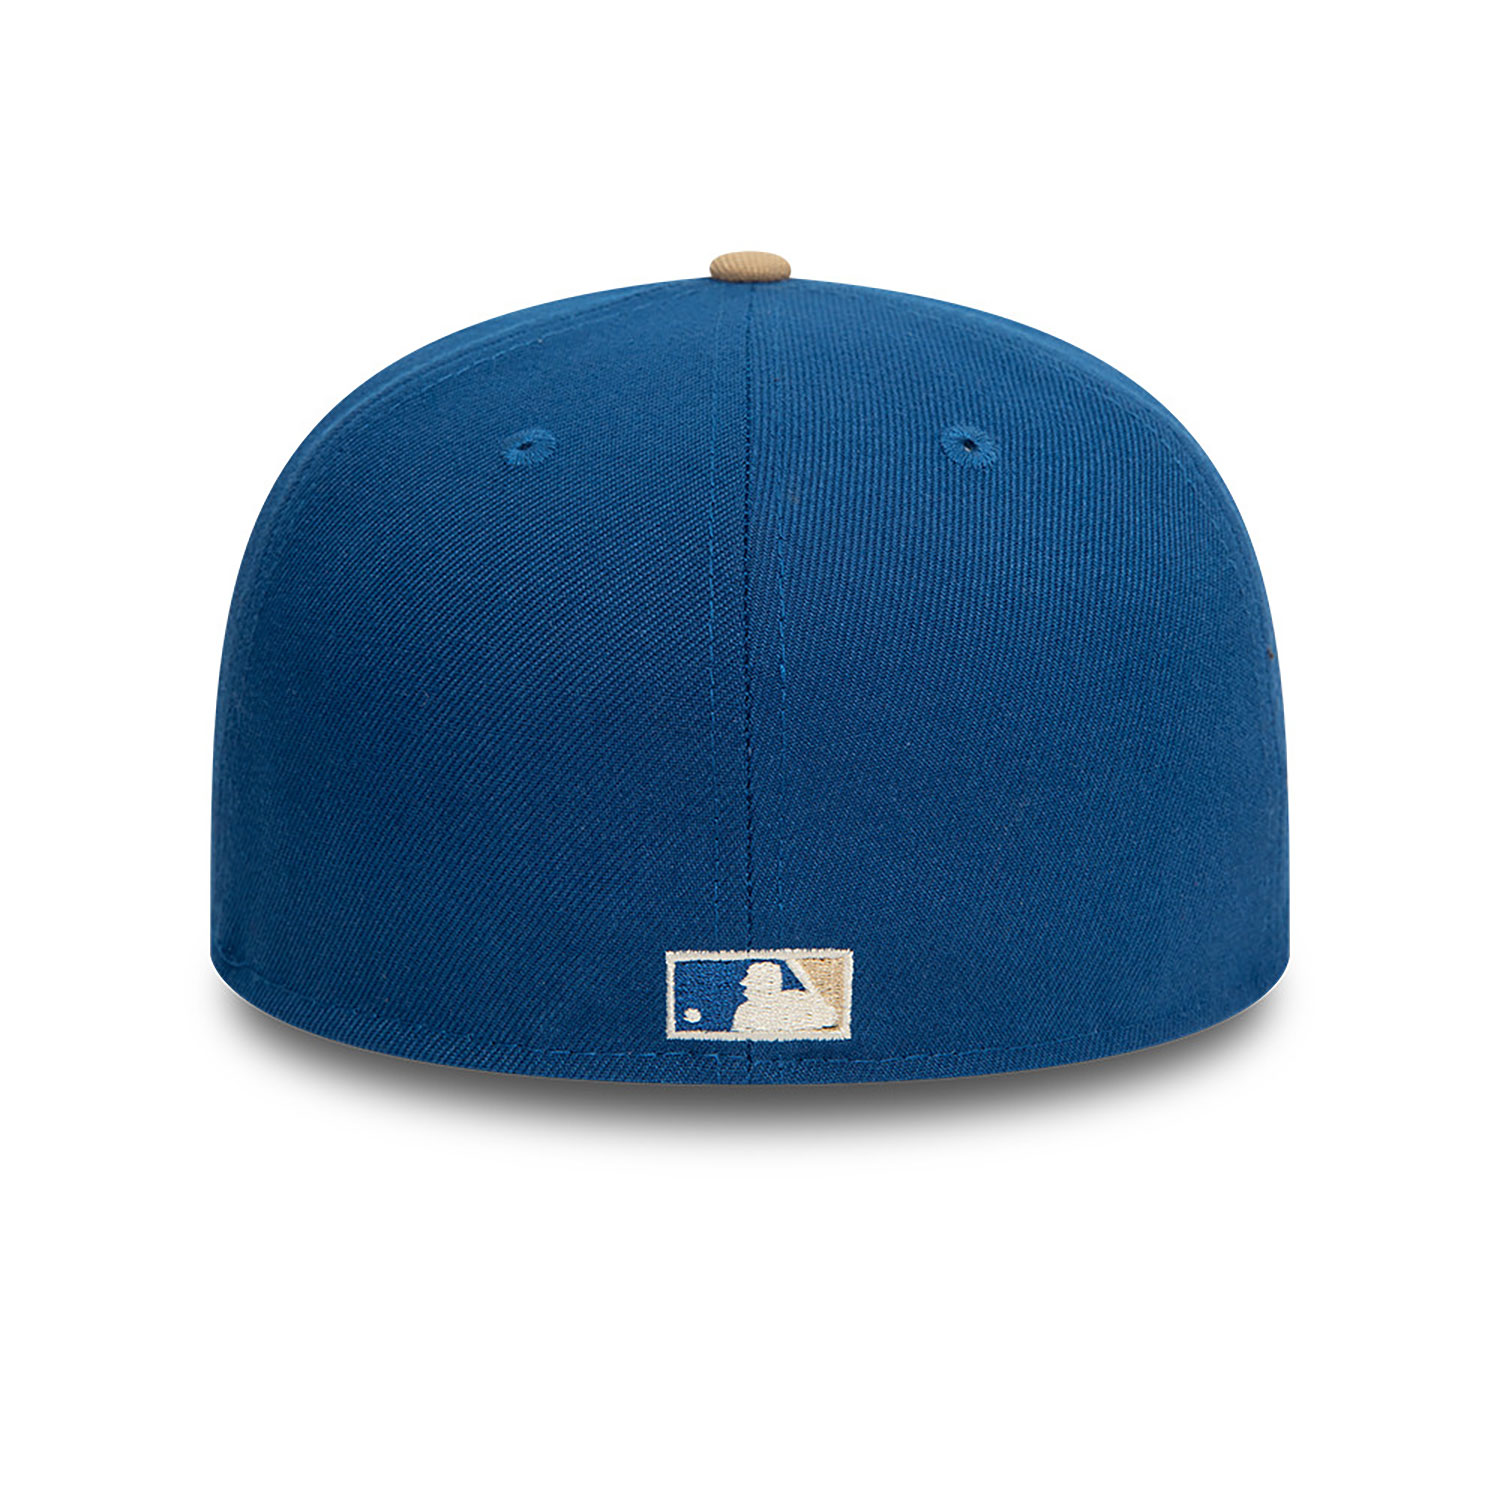 Cleveland Indians Alternate Logo Blue 59FIFTY Fitted Cap